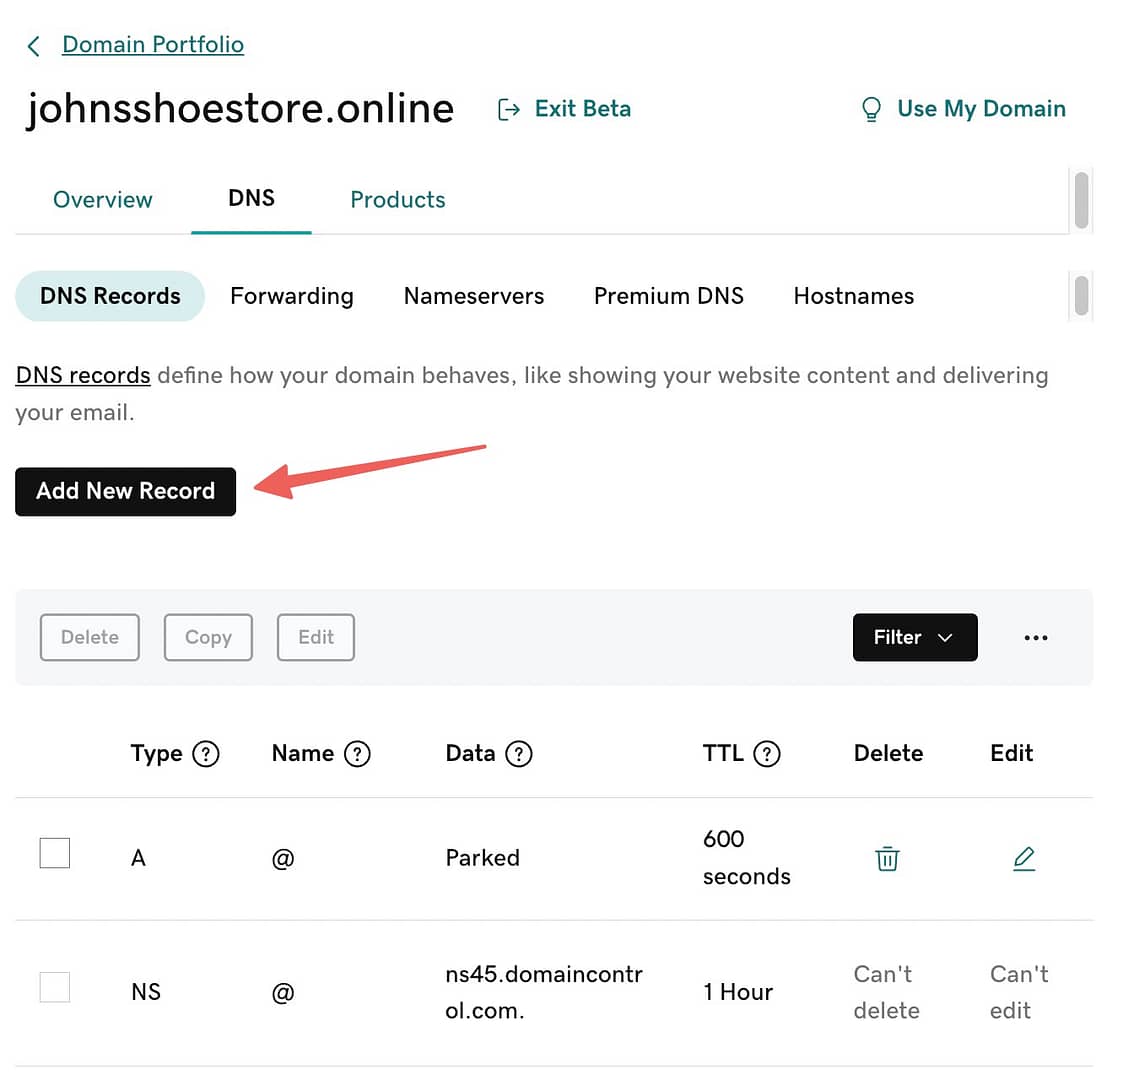 How to create subdomain in GoDaddy: Johnsshoestore.online DNS Records with a red arrow pointing at the "Add New Record" button.